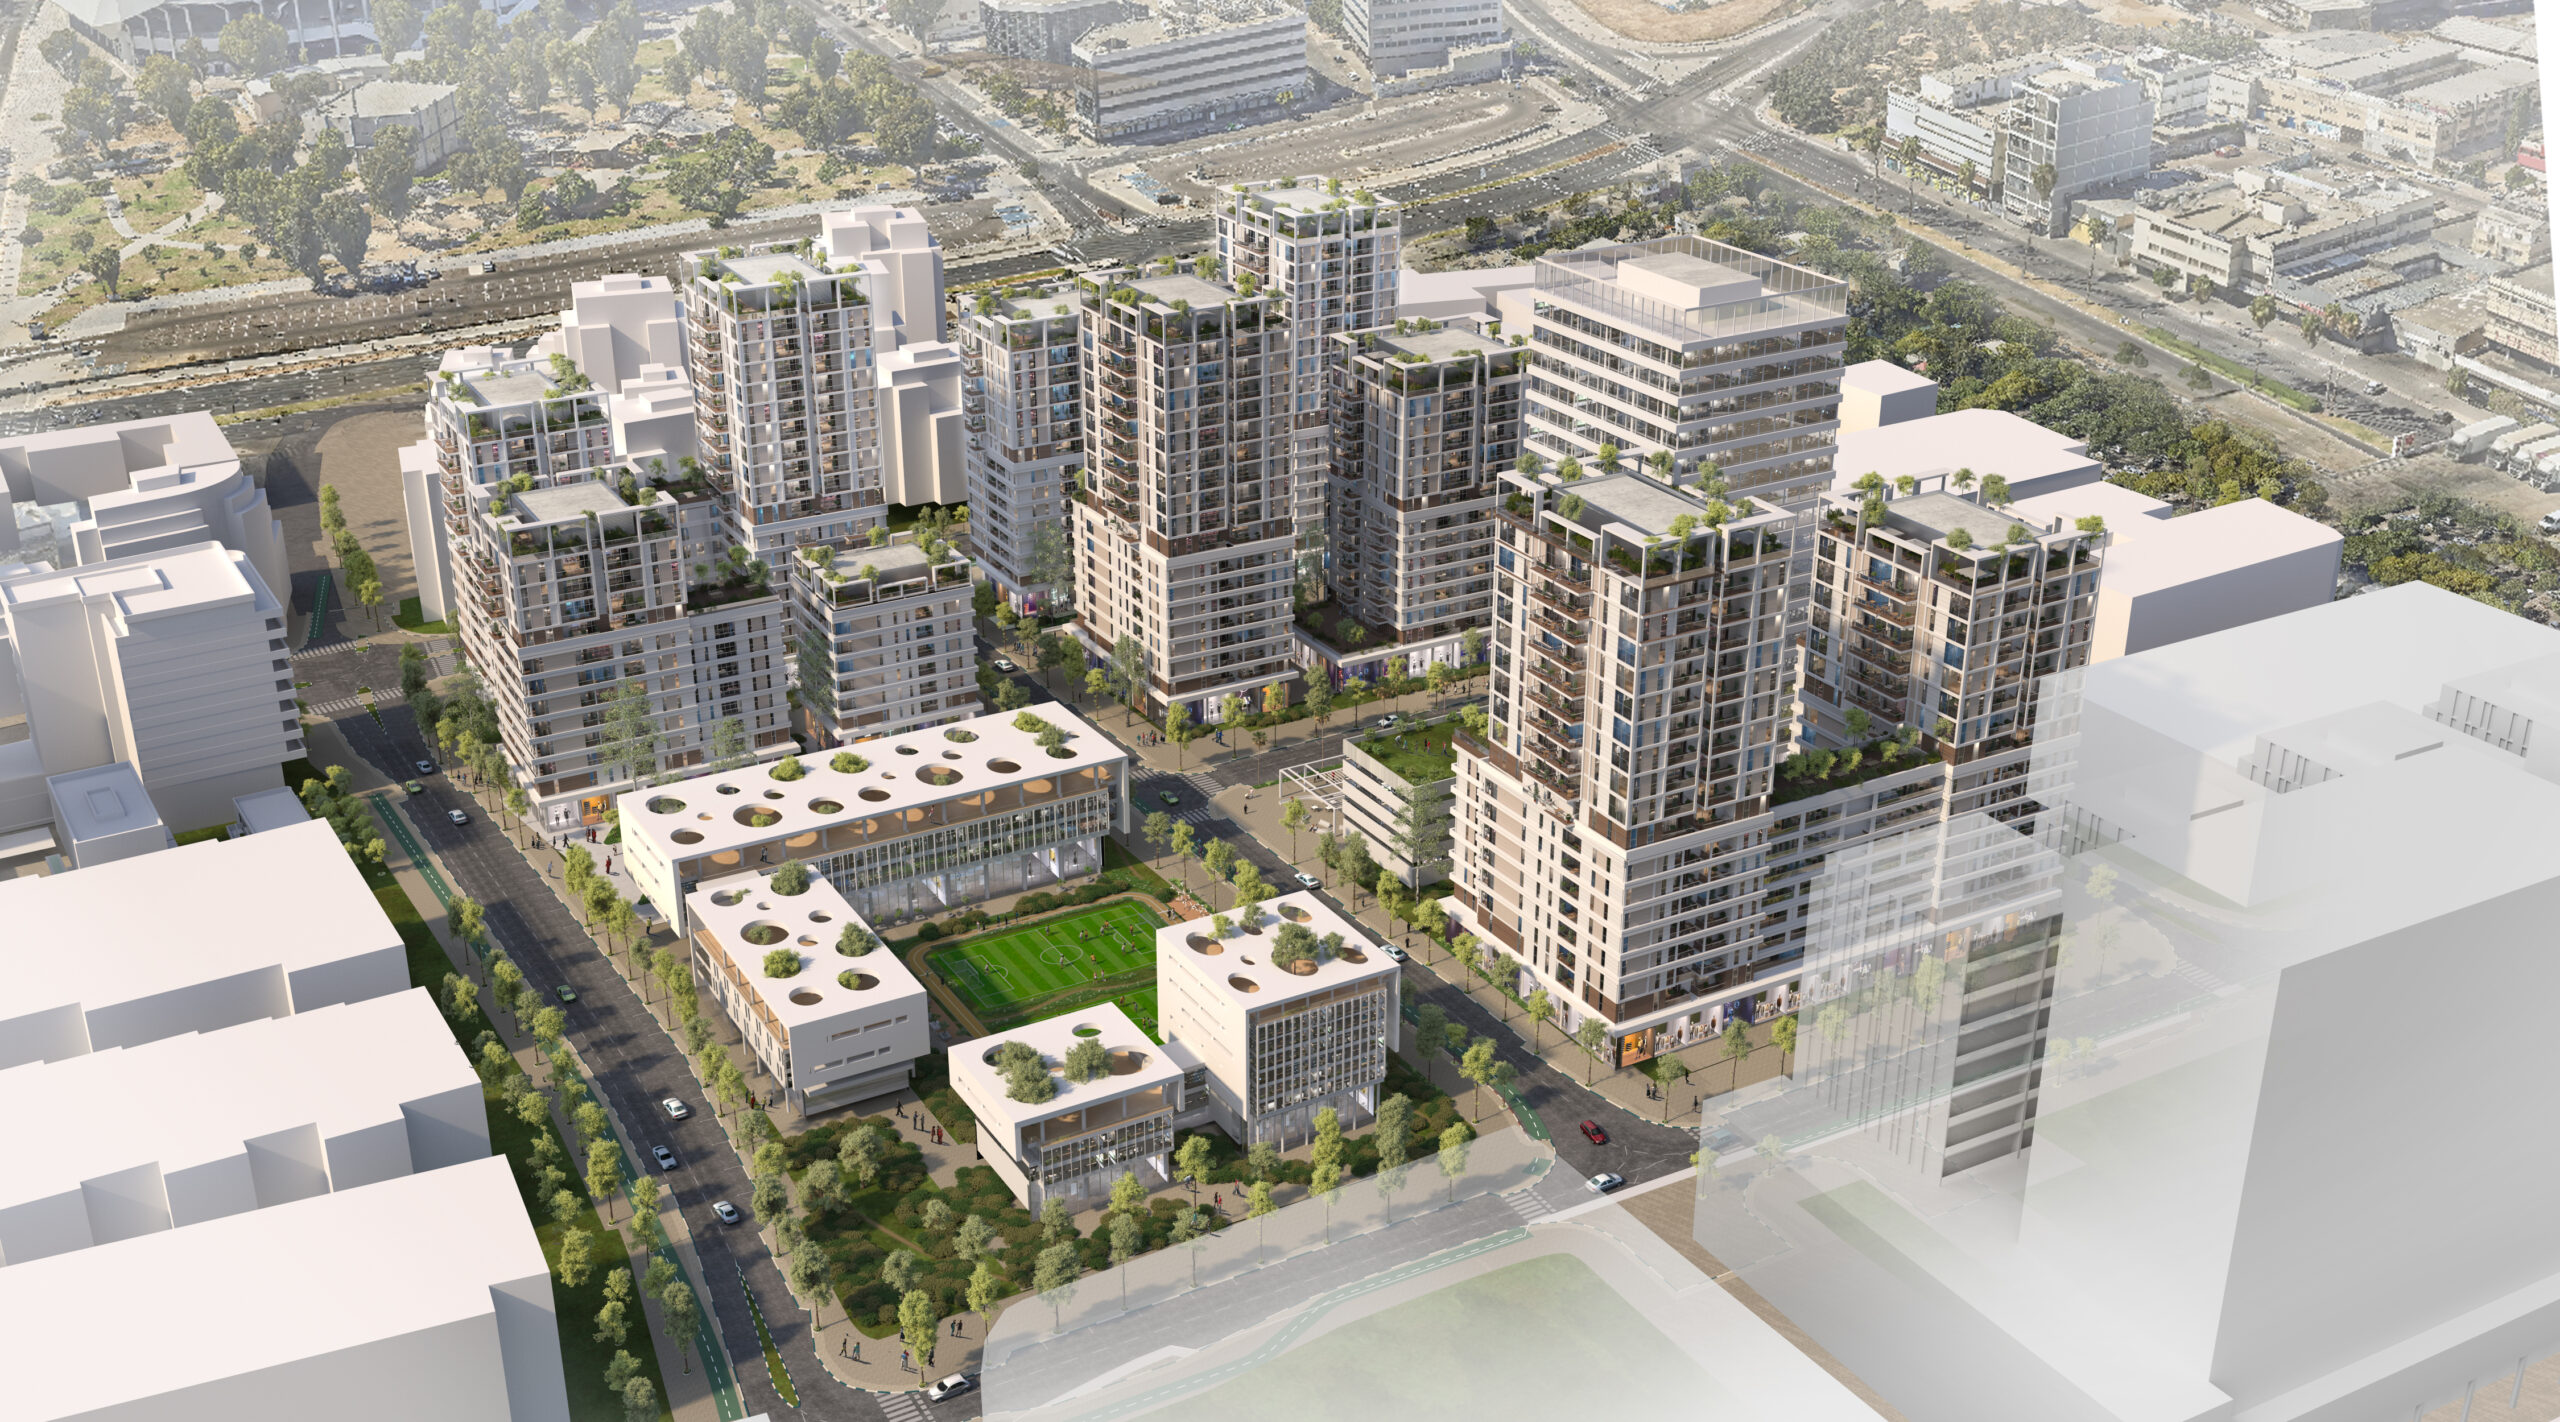 Snir Orchard: Preview of the planned mixed-use complex development integrating residential, commerce, offices and public outdoor spaces | Reality the Leading Group of Real Estate Investment Funds in Israel